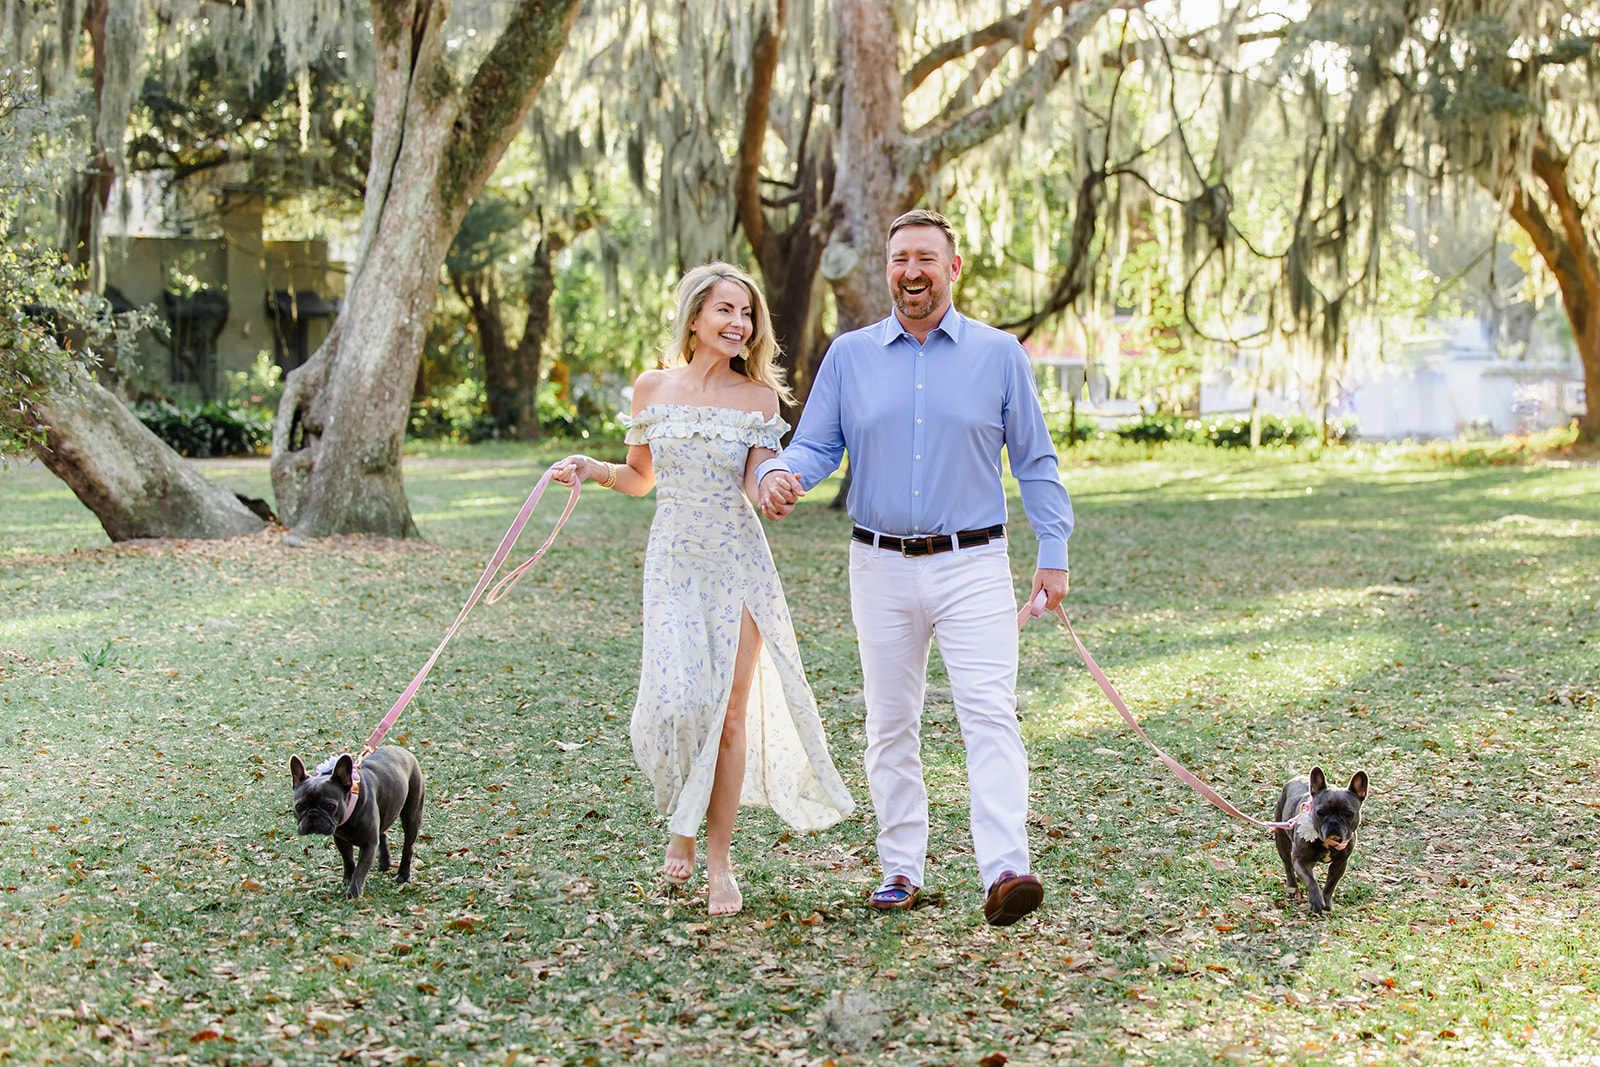 St. Simons Island Couple Photography - Frenchies at the beach!